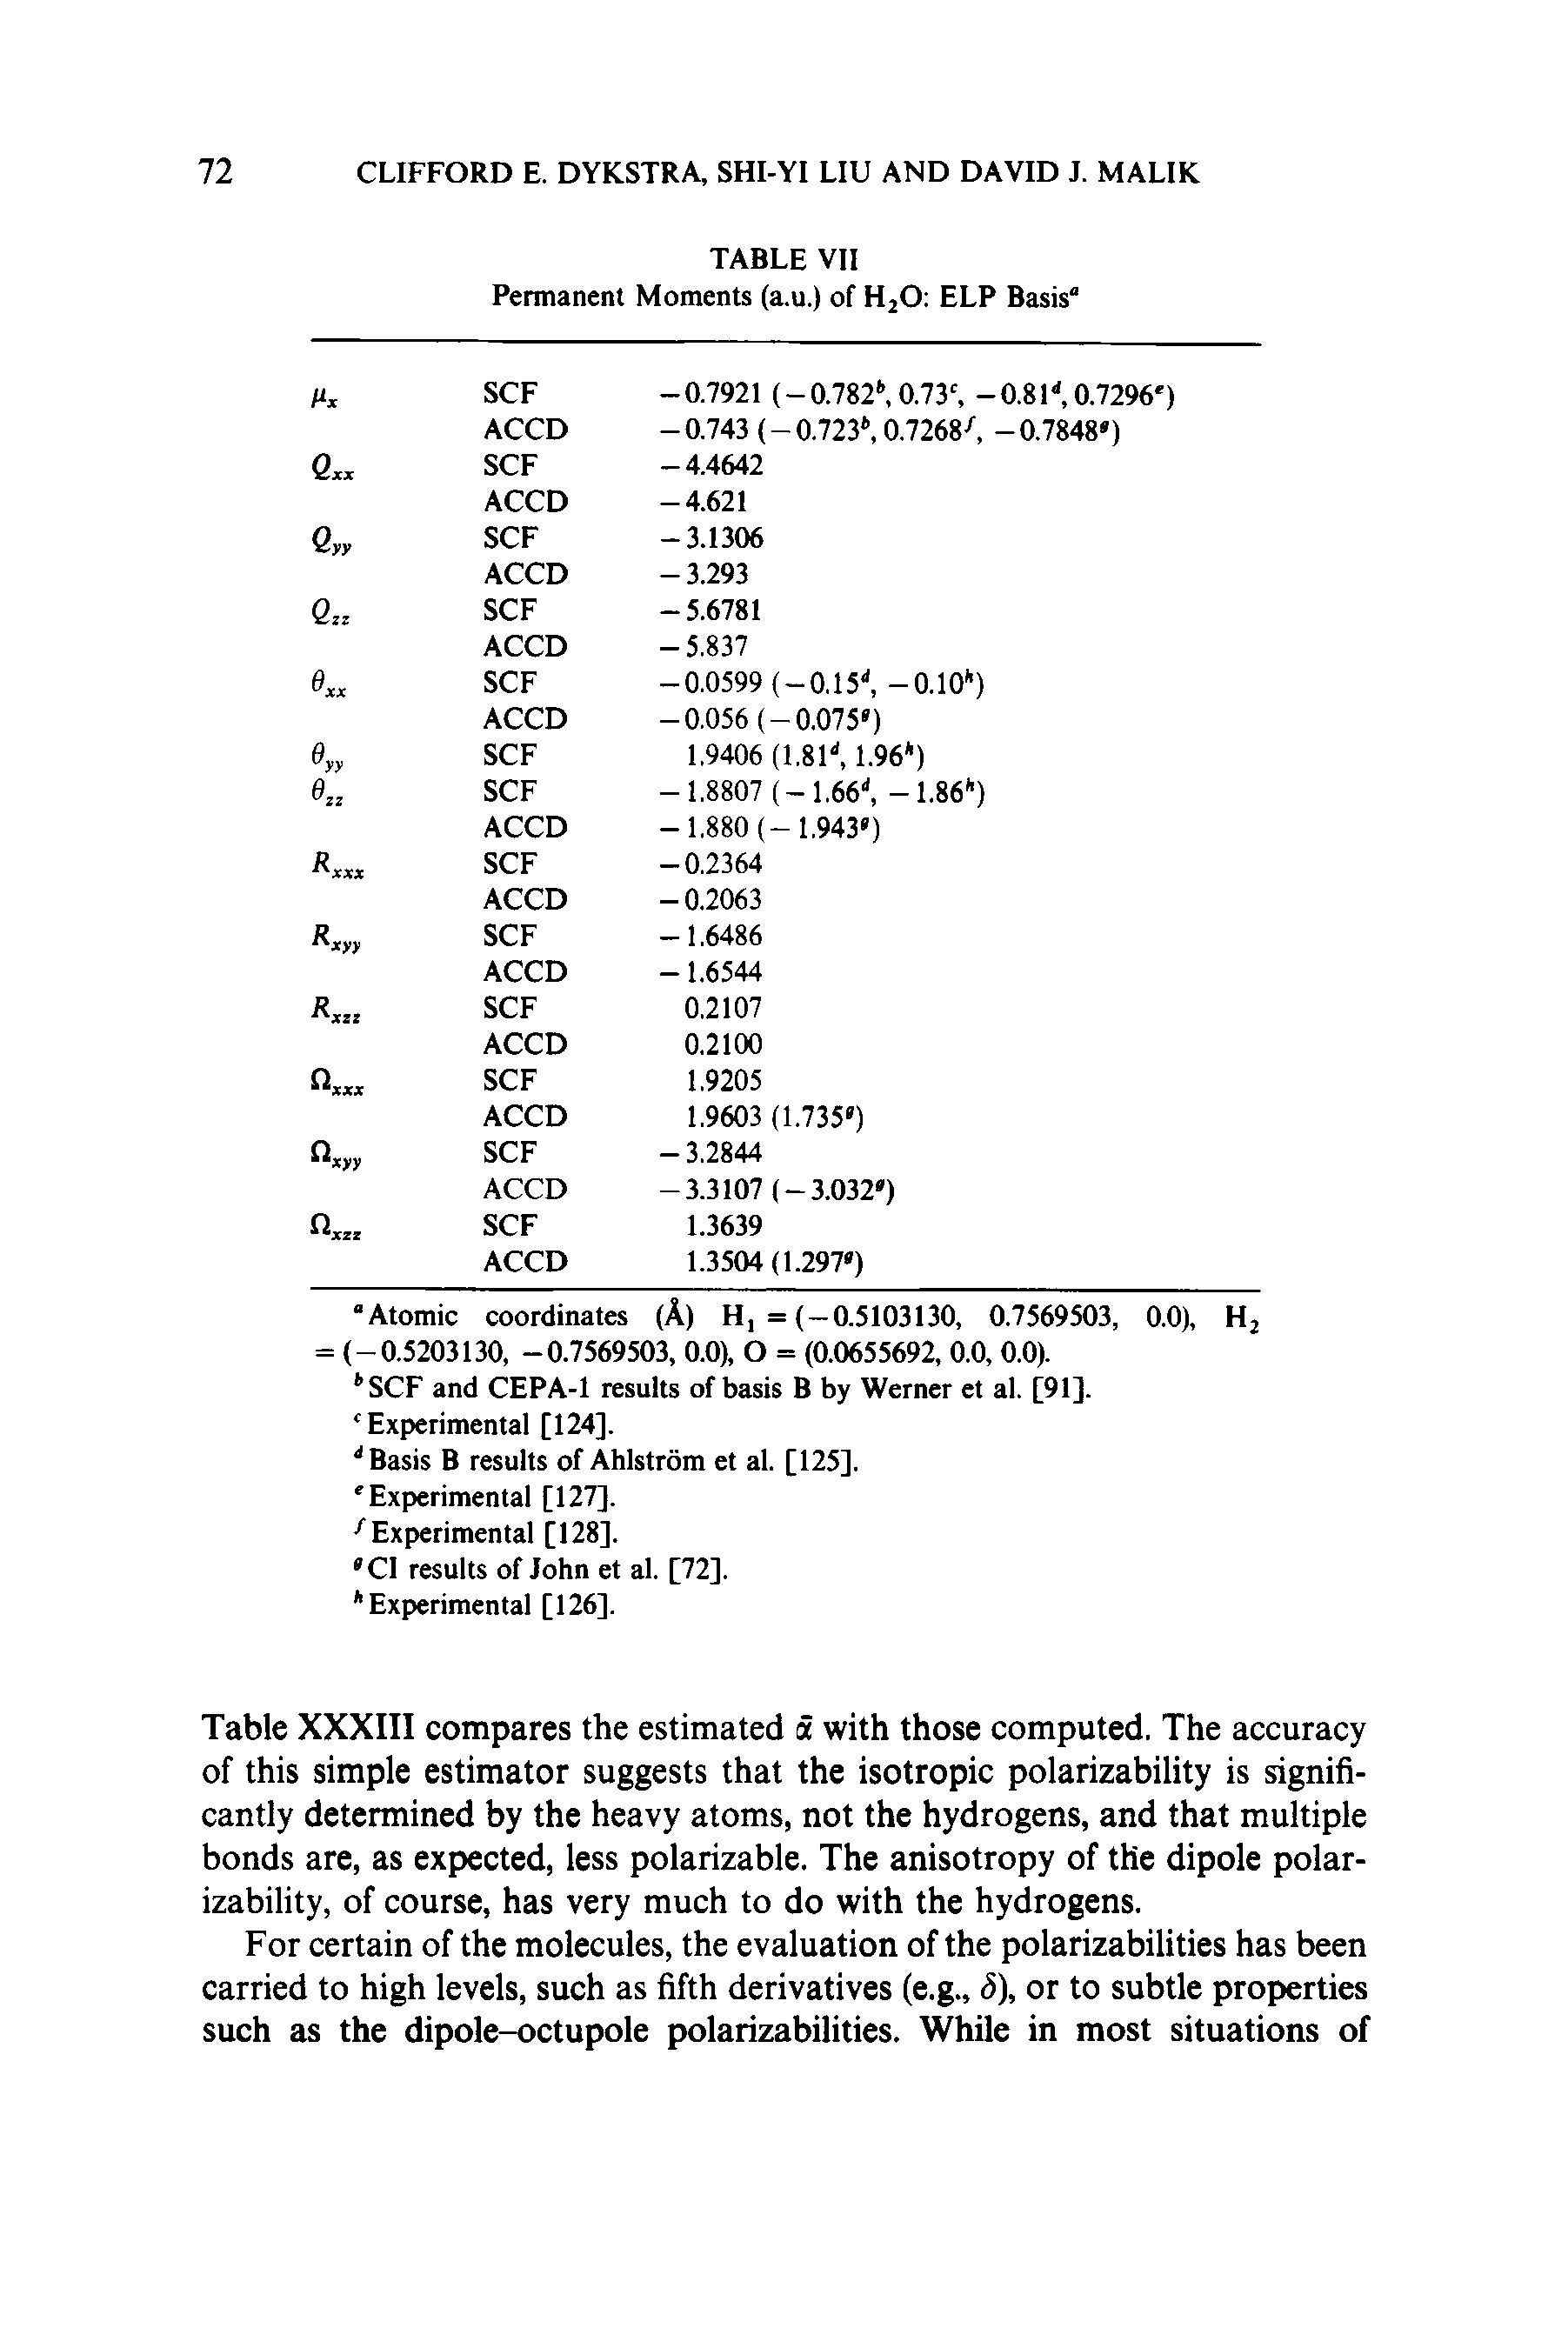 Table XXXIII compares the estimated a with those computed. The accuracy of this simple estimator suggests that the isotropic polarizability is significantly determined by the heavy atoms, not the hydrogens, and that multiple bonds are, as expected, less polarizable. The anisotropy of the dipole polarizability, of course, has very much to do with the hydrogens.